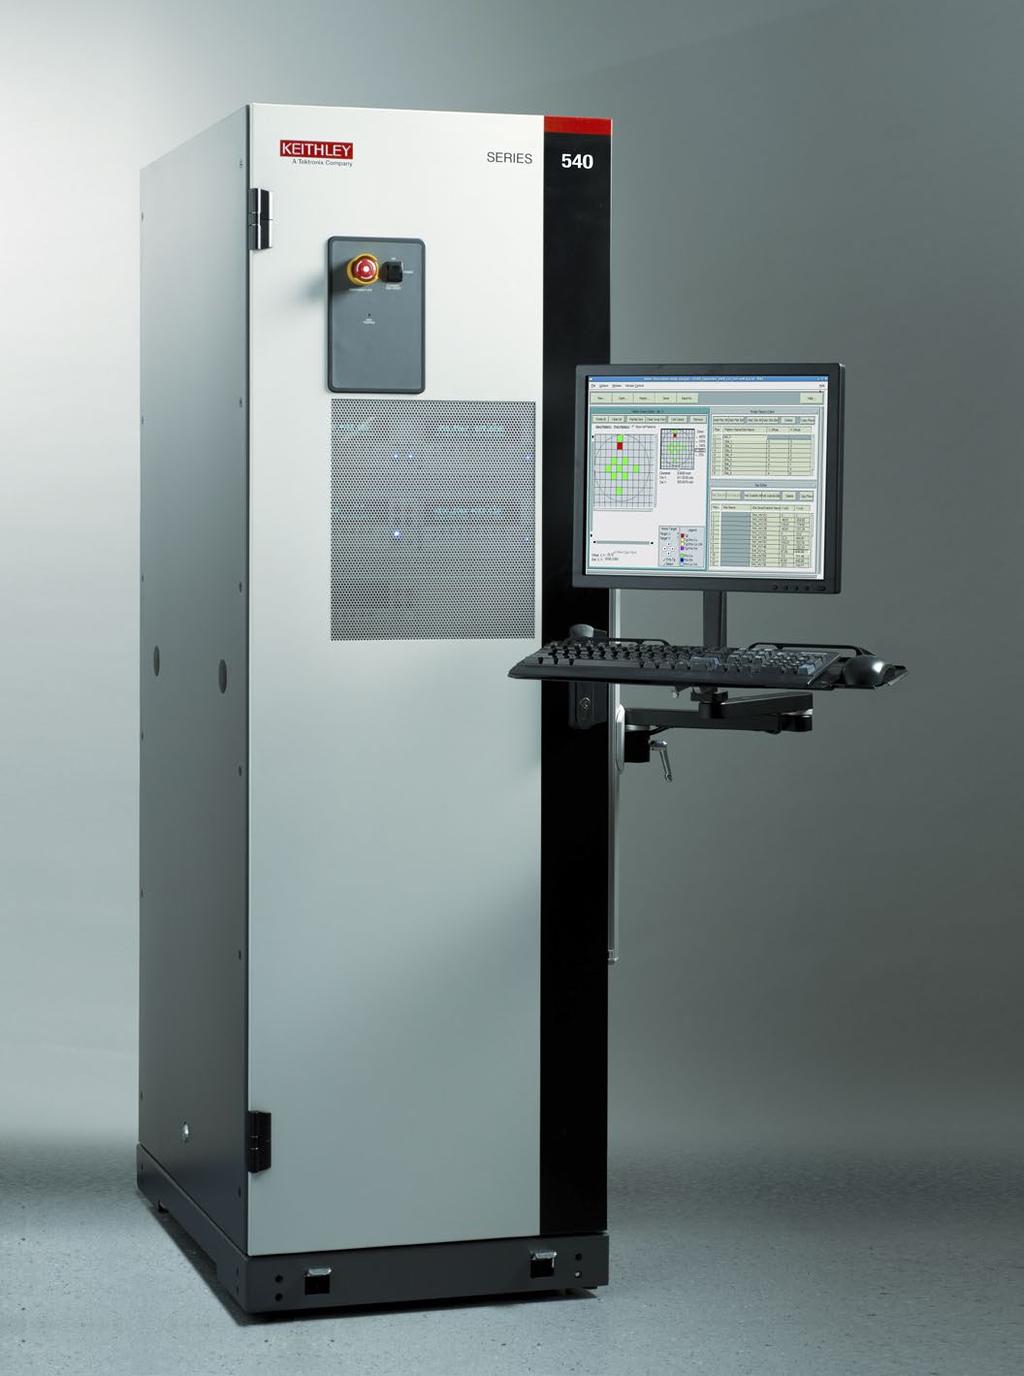 S540 Power Semiconductor Test System Key Features Automatically perform all wafer-level parametric tests on up to 48 pins, including high voltage breakdown, capacitance, and low voltage measurements,